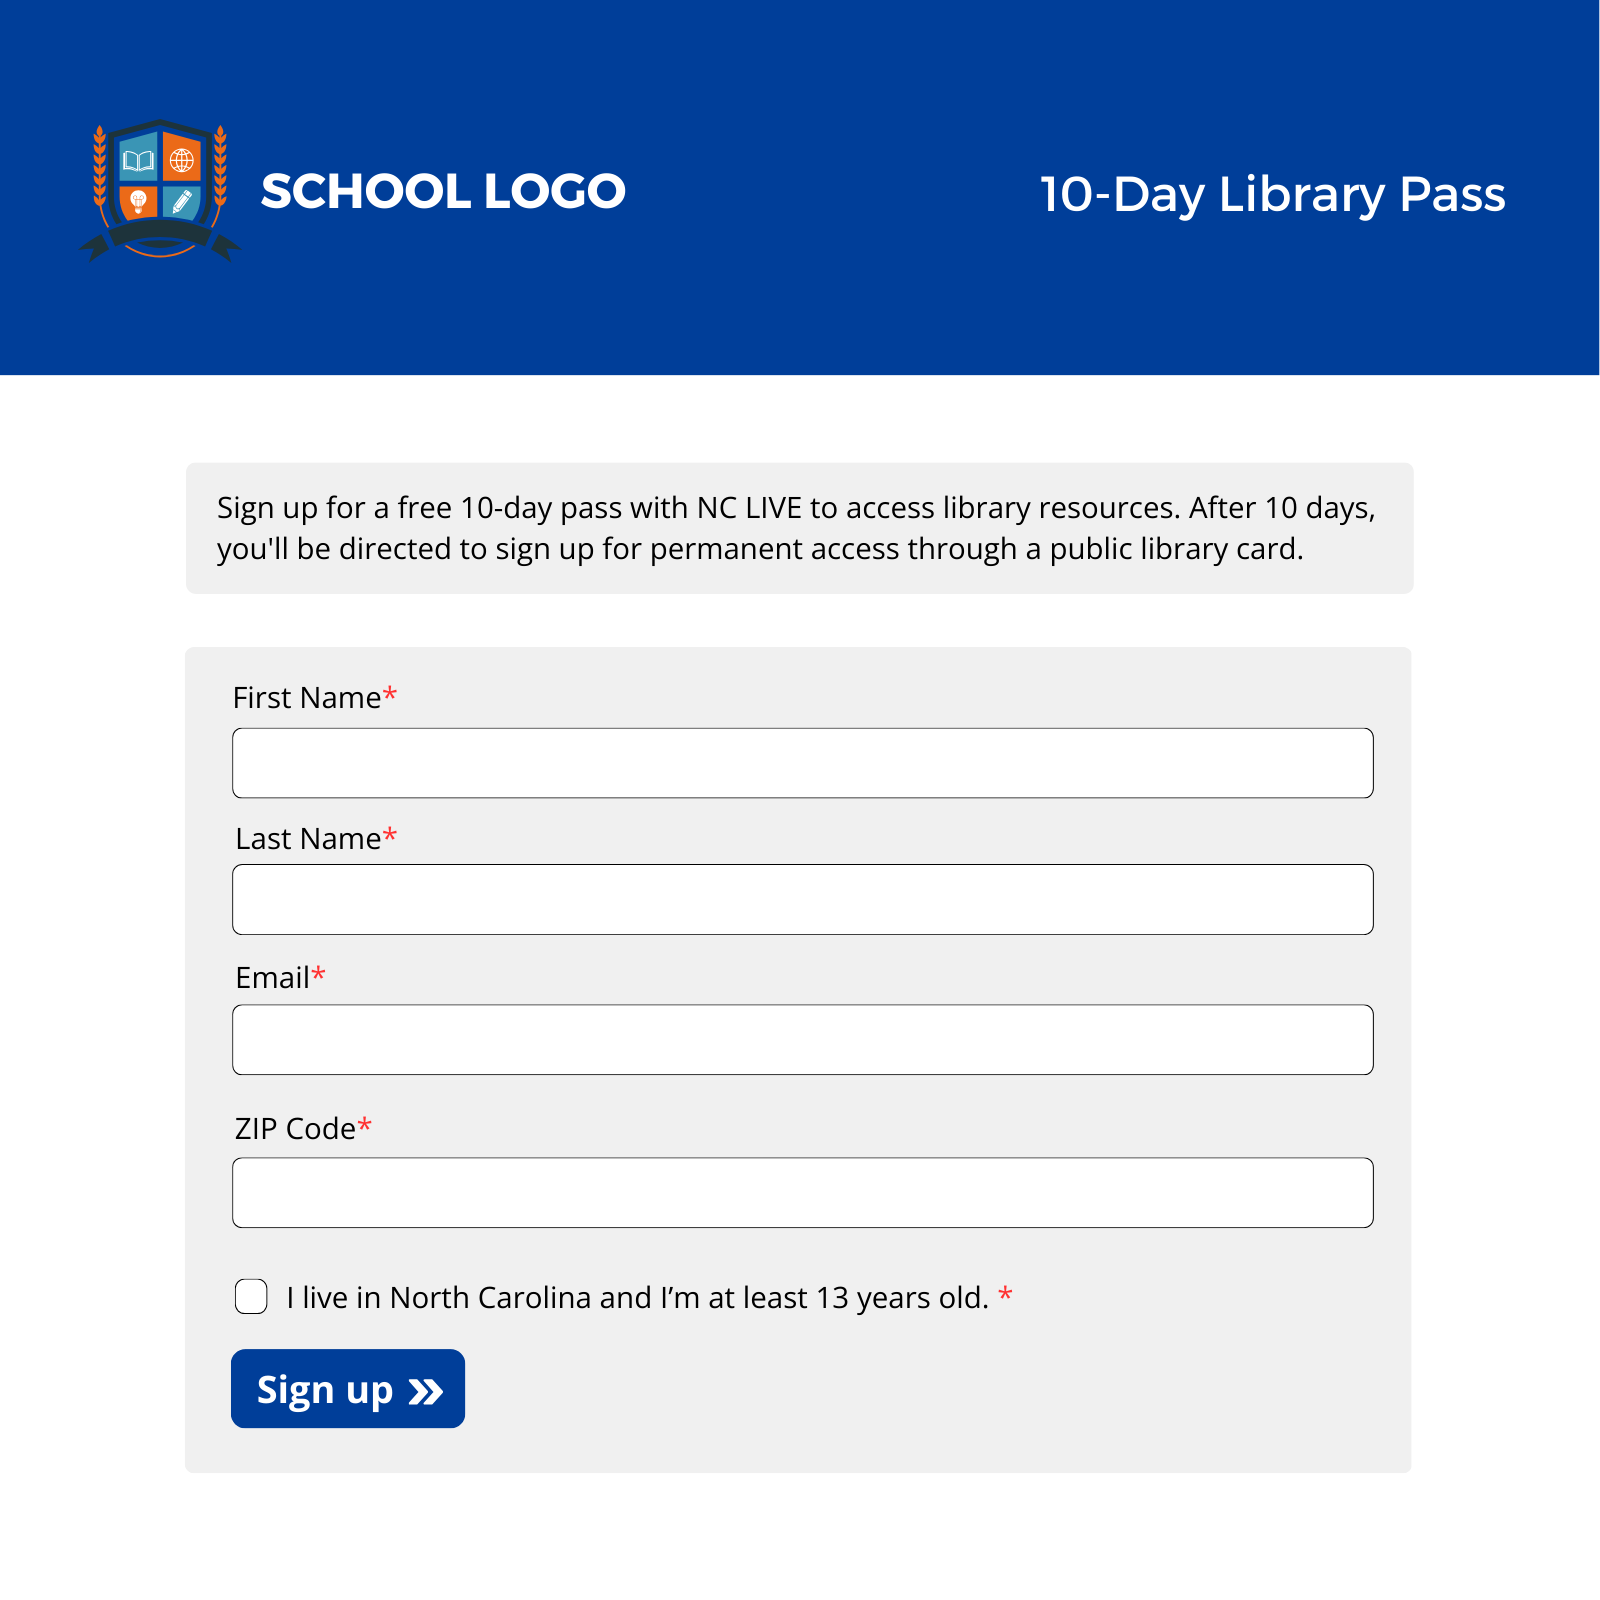 A form with a fake school logo at the top and boxes for name, email, and ZIP code.